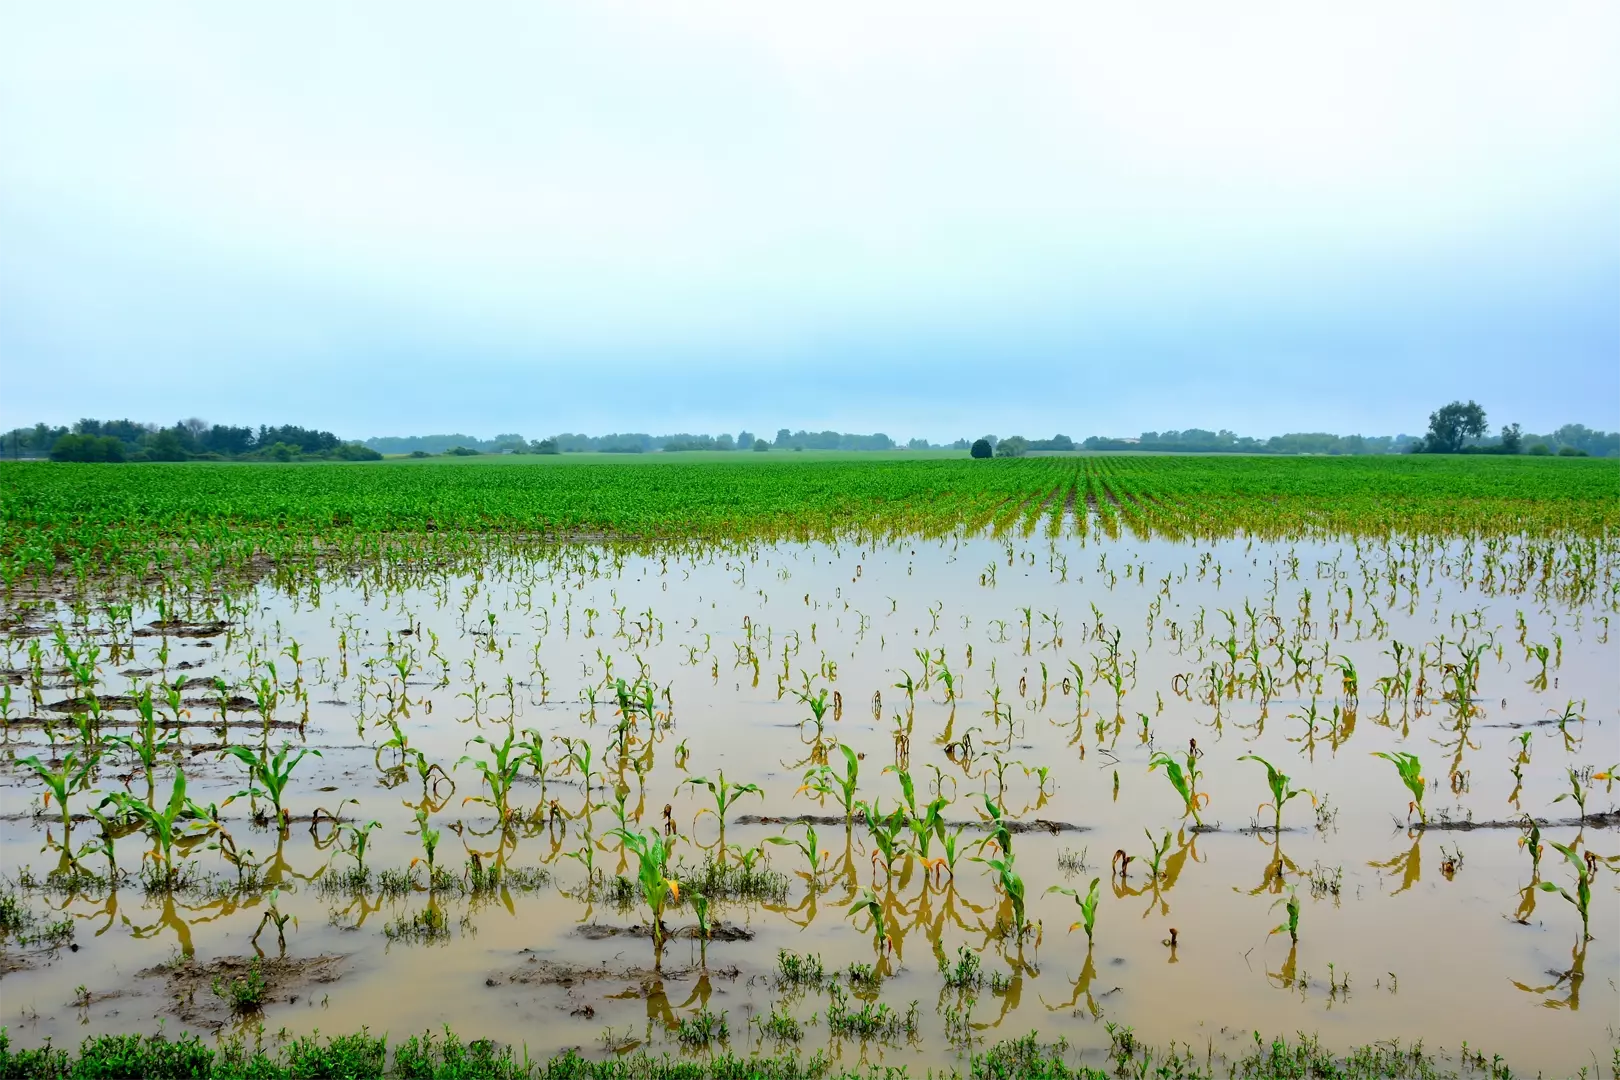 Rain clouds above a midwest farm fields flooded by heavy rain leaving corn maize crops stressed from too much water and water damaged.